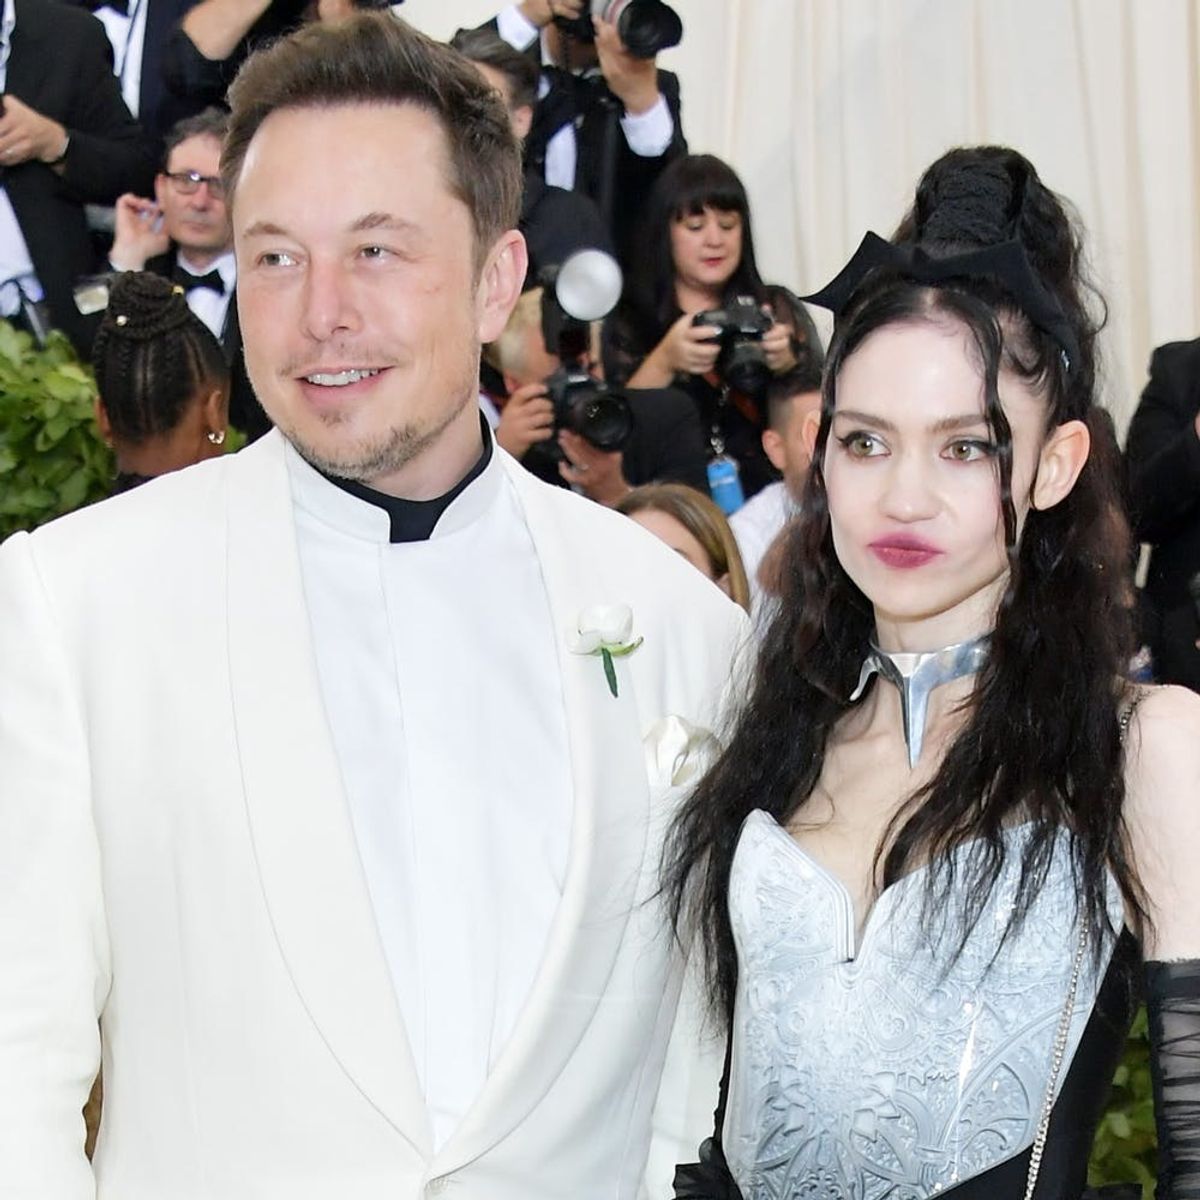 Elon Musk and Grimes Went to the 2018 Met Gala Together and People Can’t Handle It